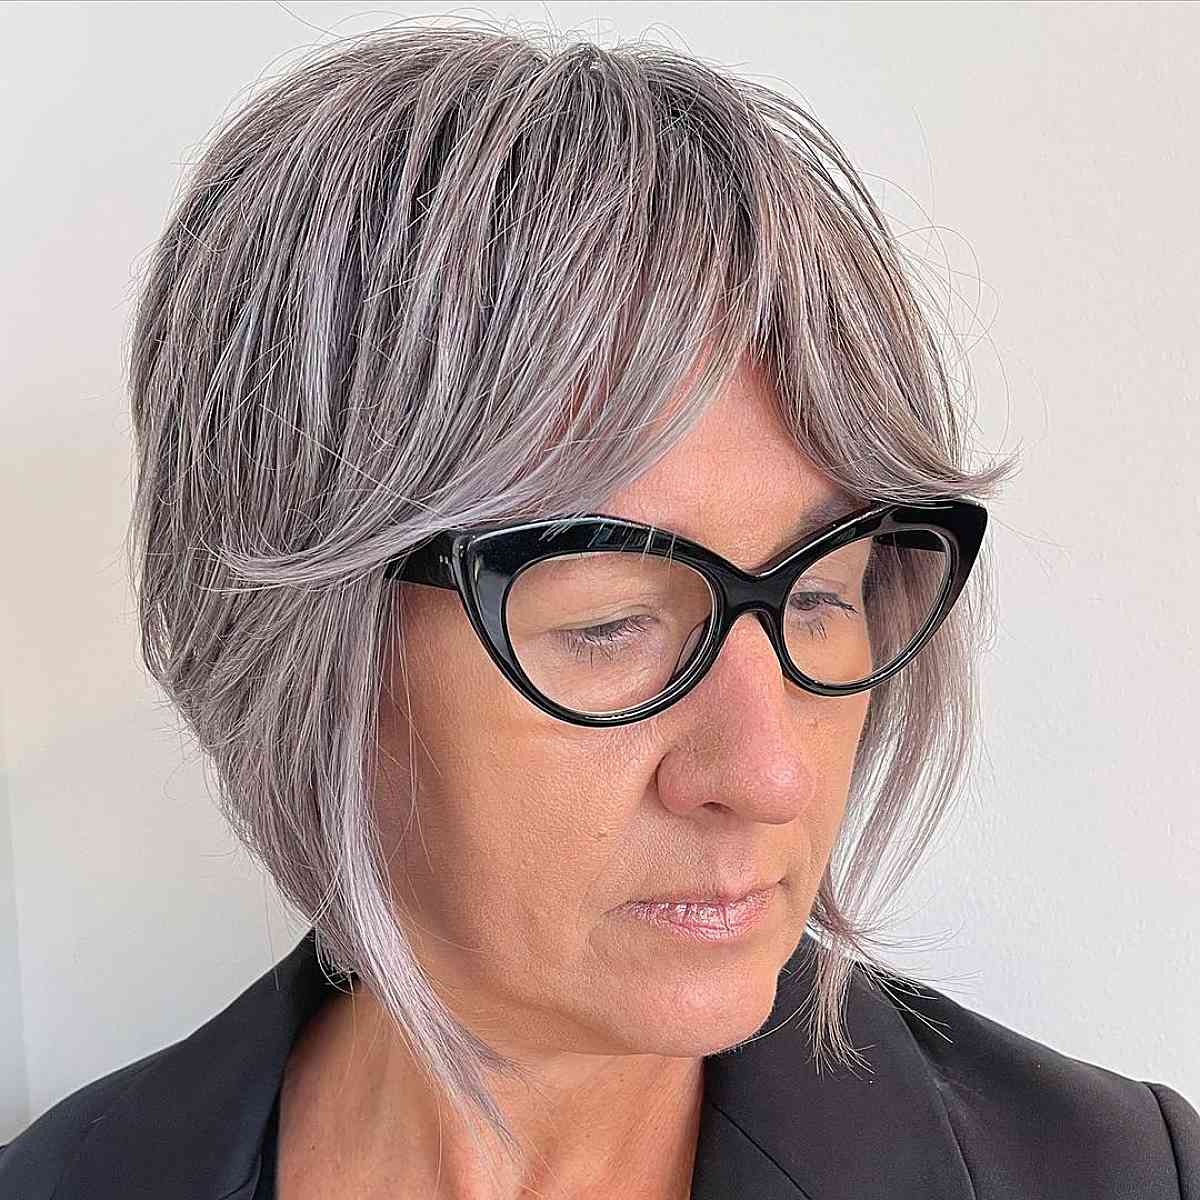 Straight bob for woman over 50 with glasses